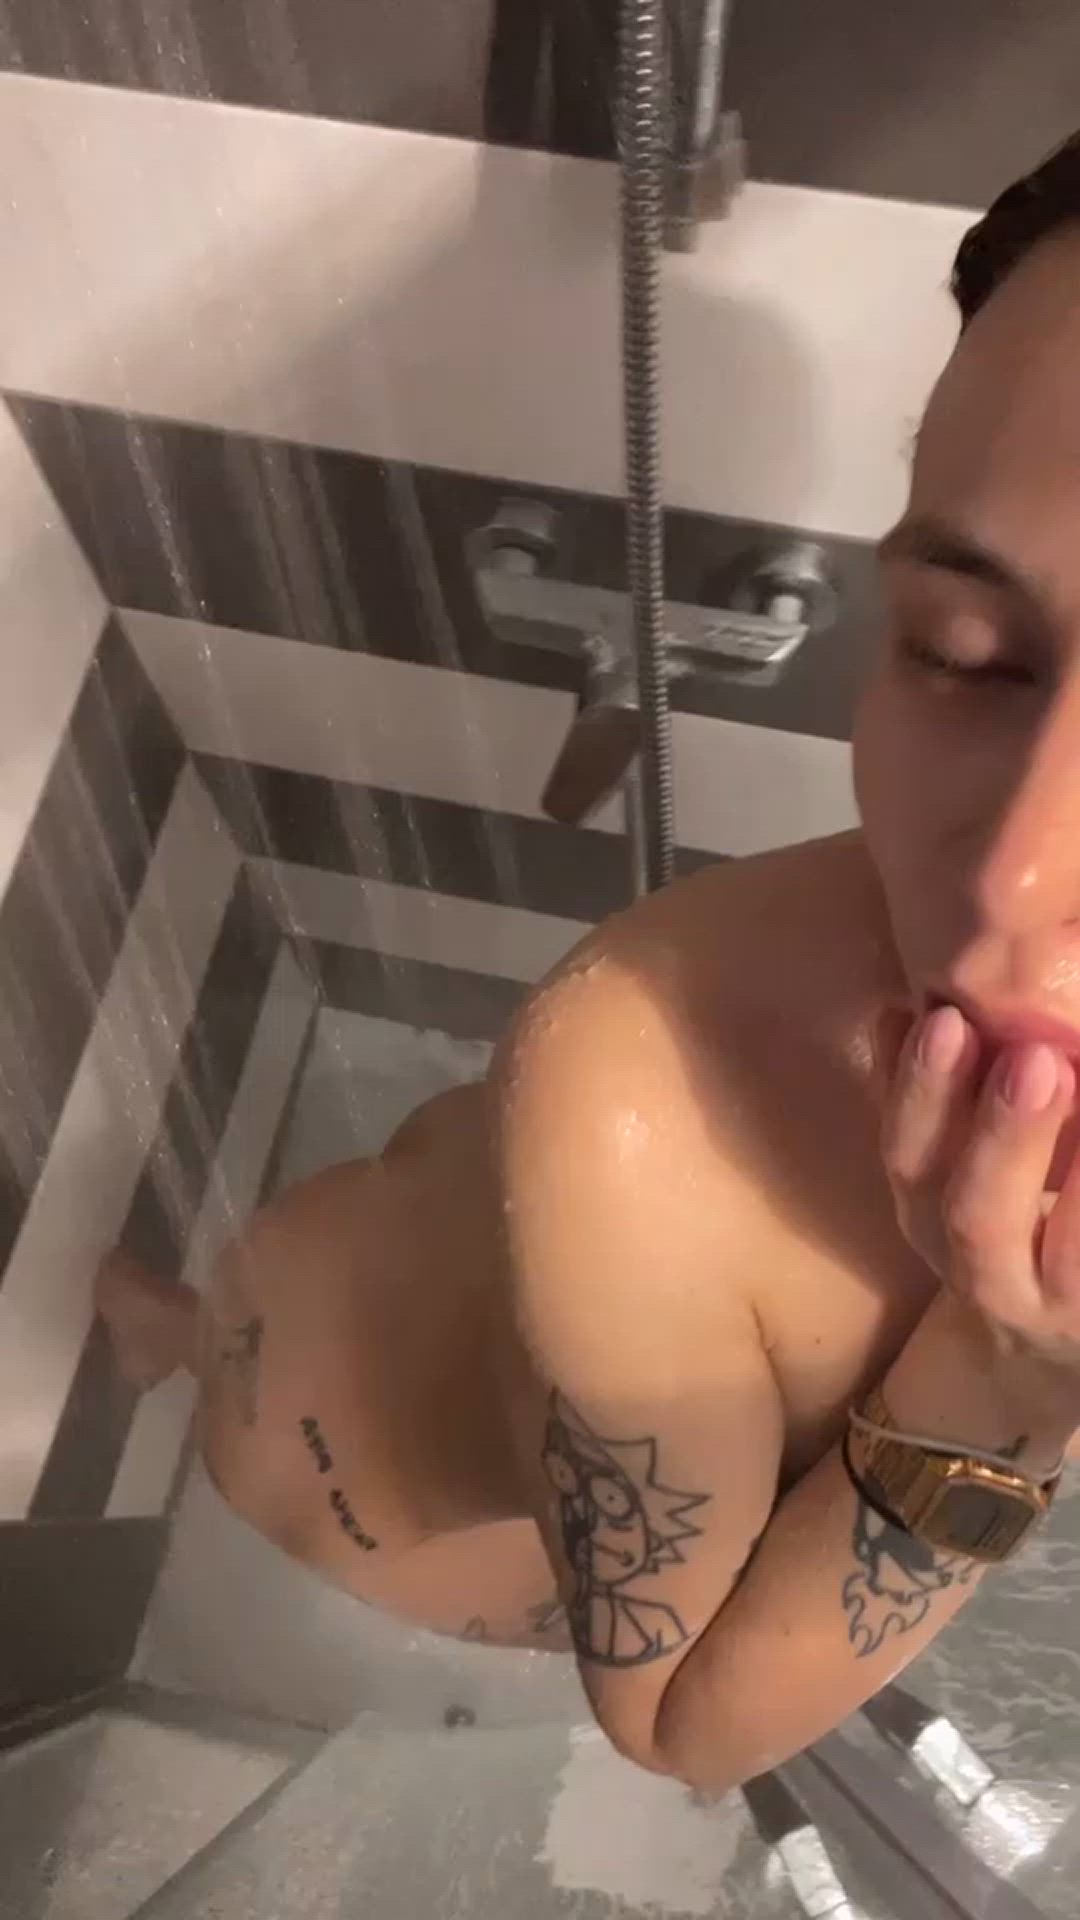 Amateur porn video with onlyfans model sweet <strong>@tsunamicassie</strong>